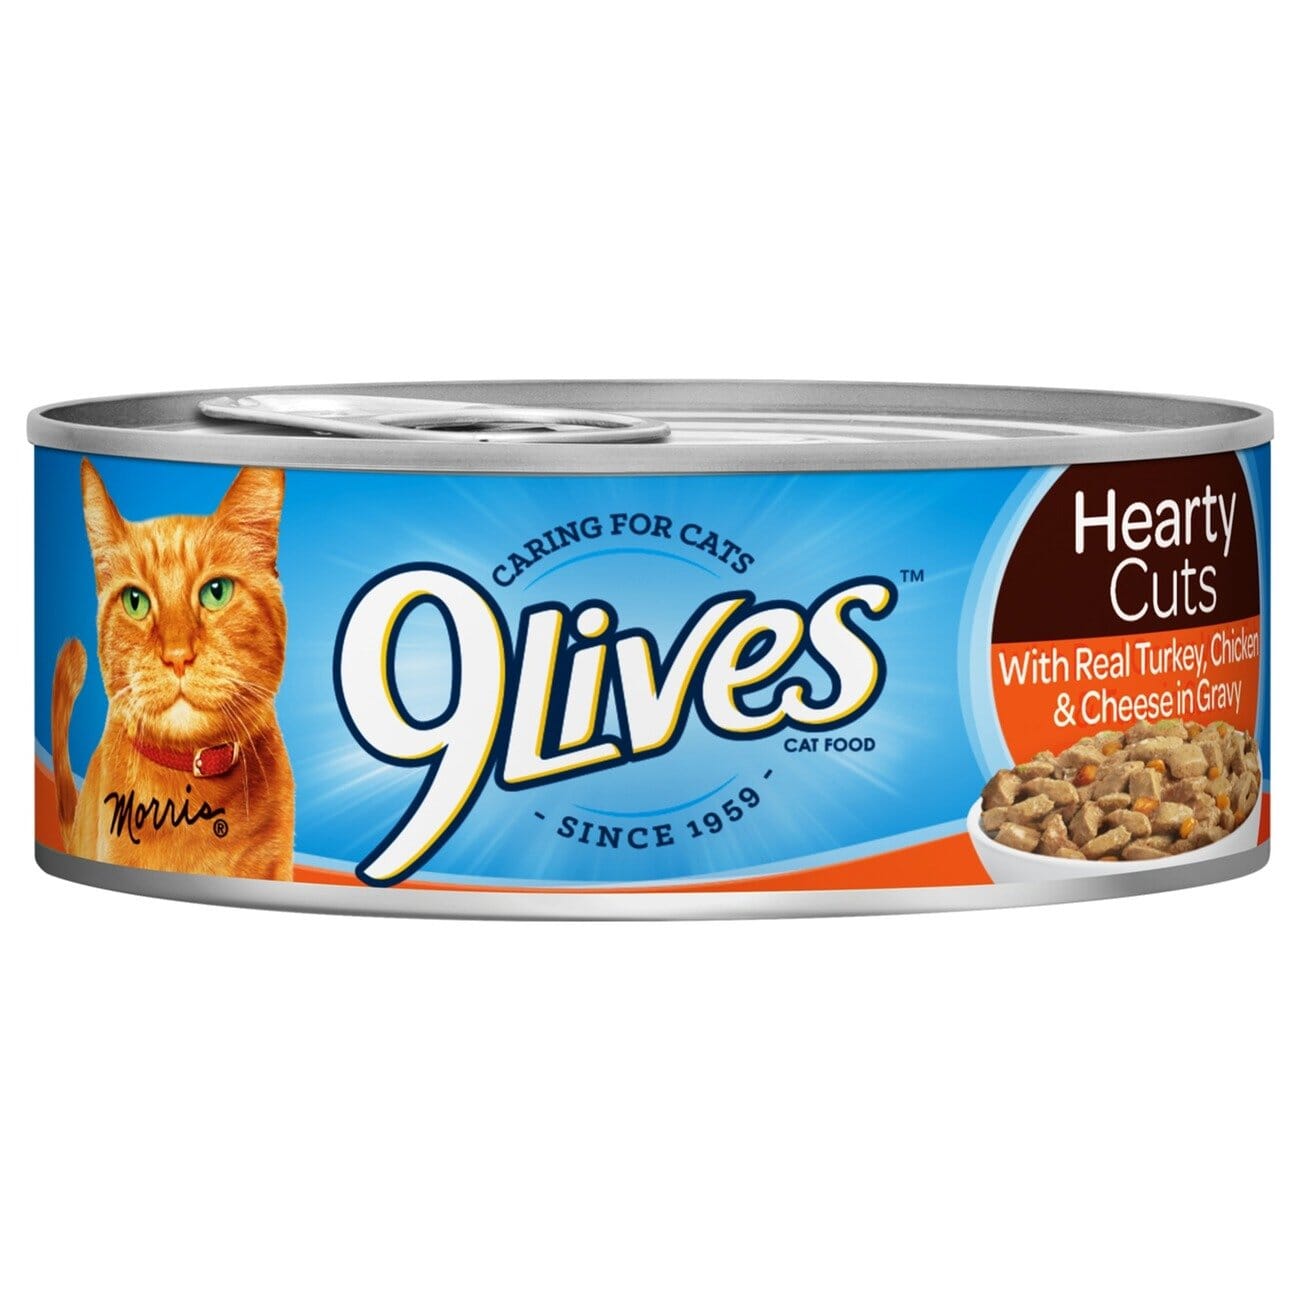 9Lives Hearty Cuts Turkey and Cheese in Gravy Canned Cat Food - 5.5 Oz - Case of 4 - 6 Pack  